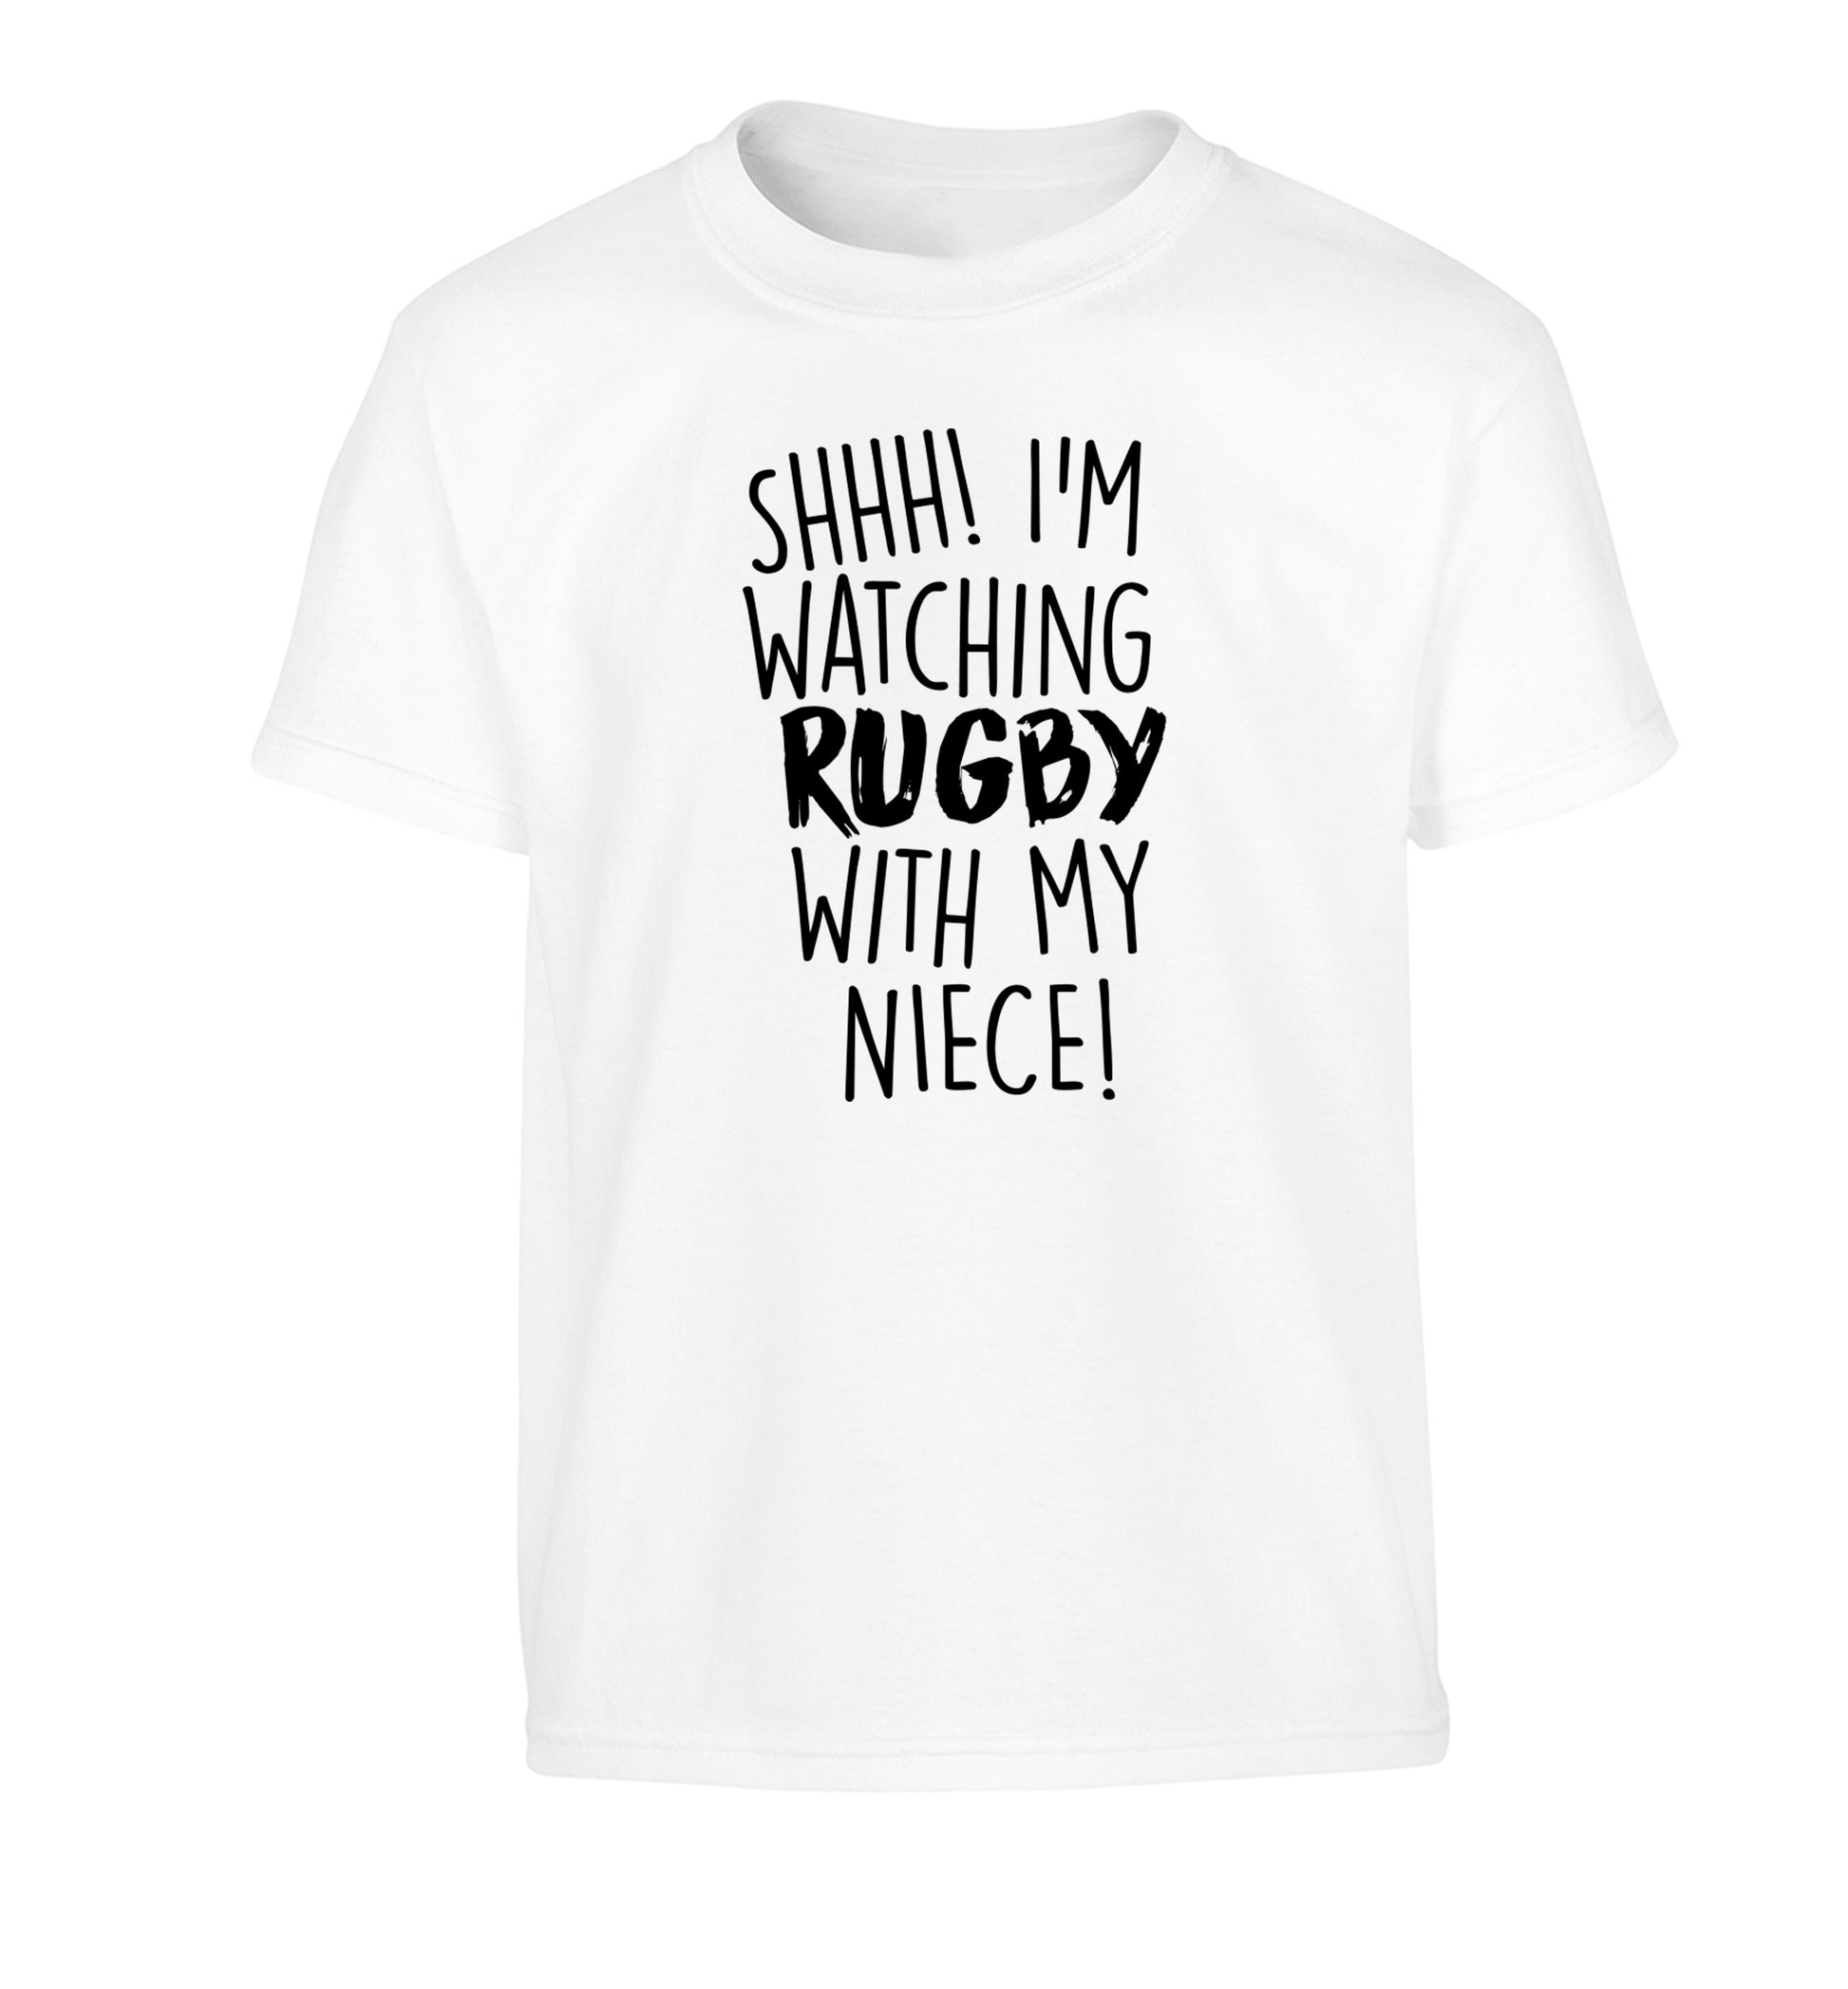 Shh.. I'm watching rugby with my niece Children's white Tshirt 12-13 Years